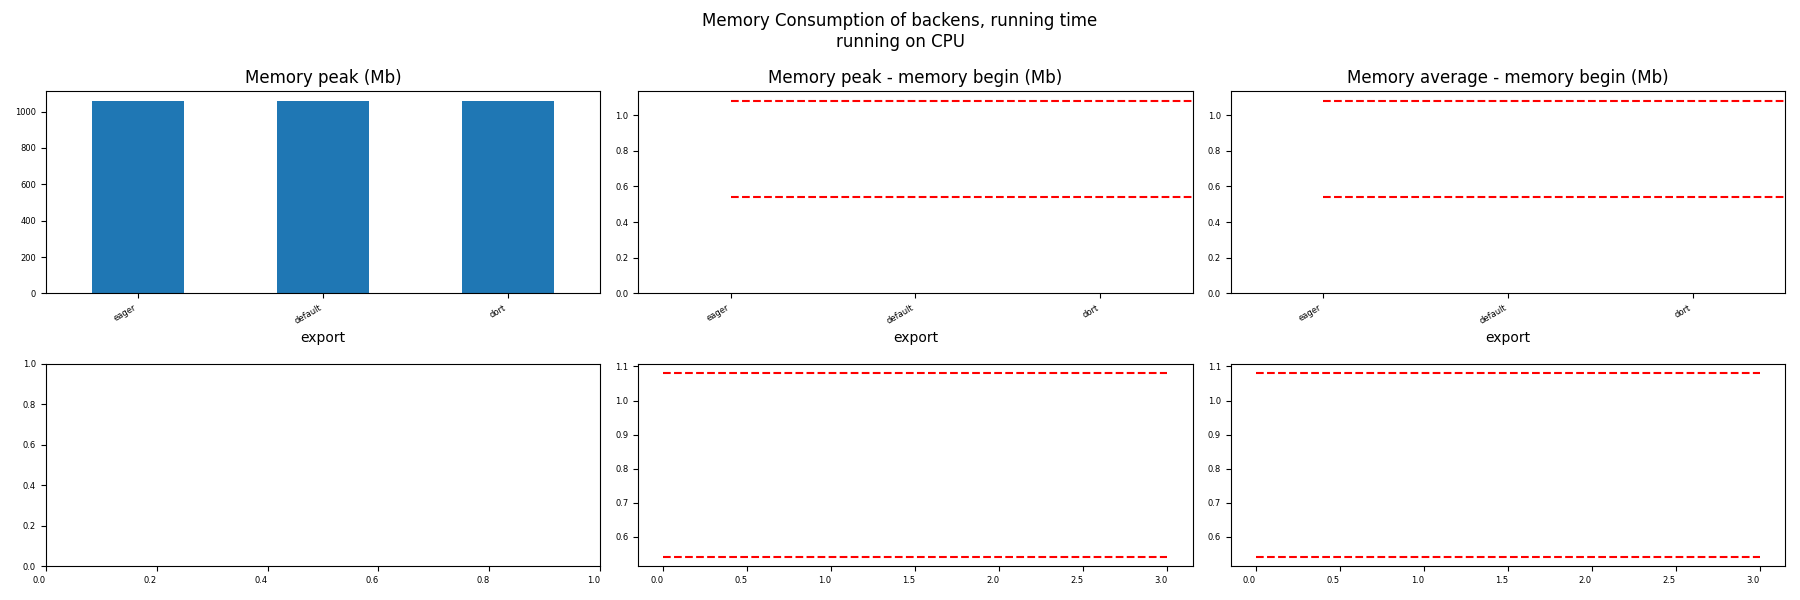 Memory Consumption of backens, running time running on CPU, Memory peak (Mb), Memory peak - memory begin (Mb), Memory average - memory begin (Mb)